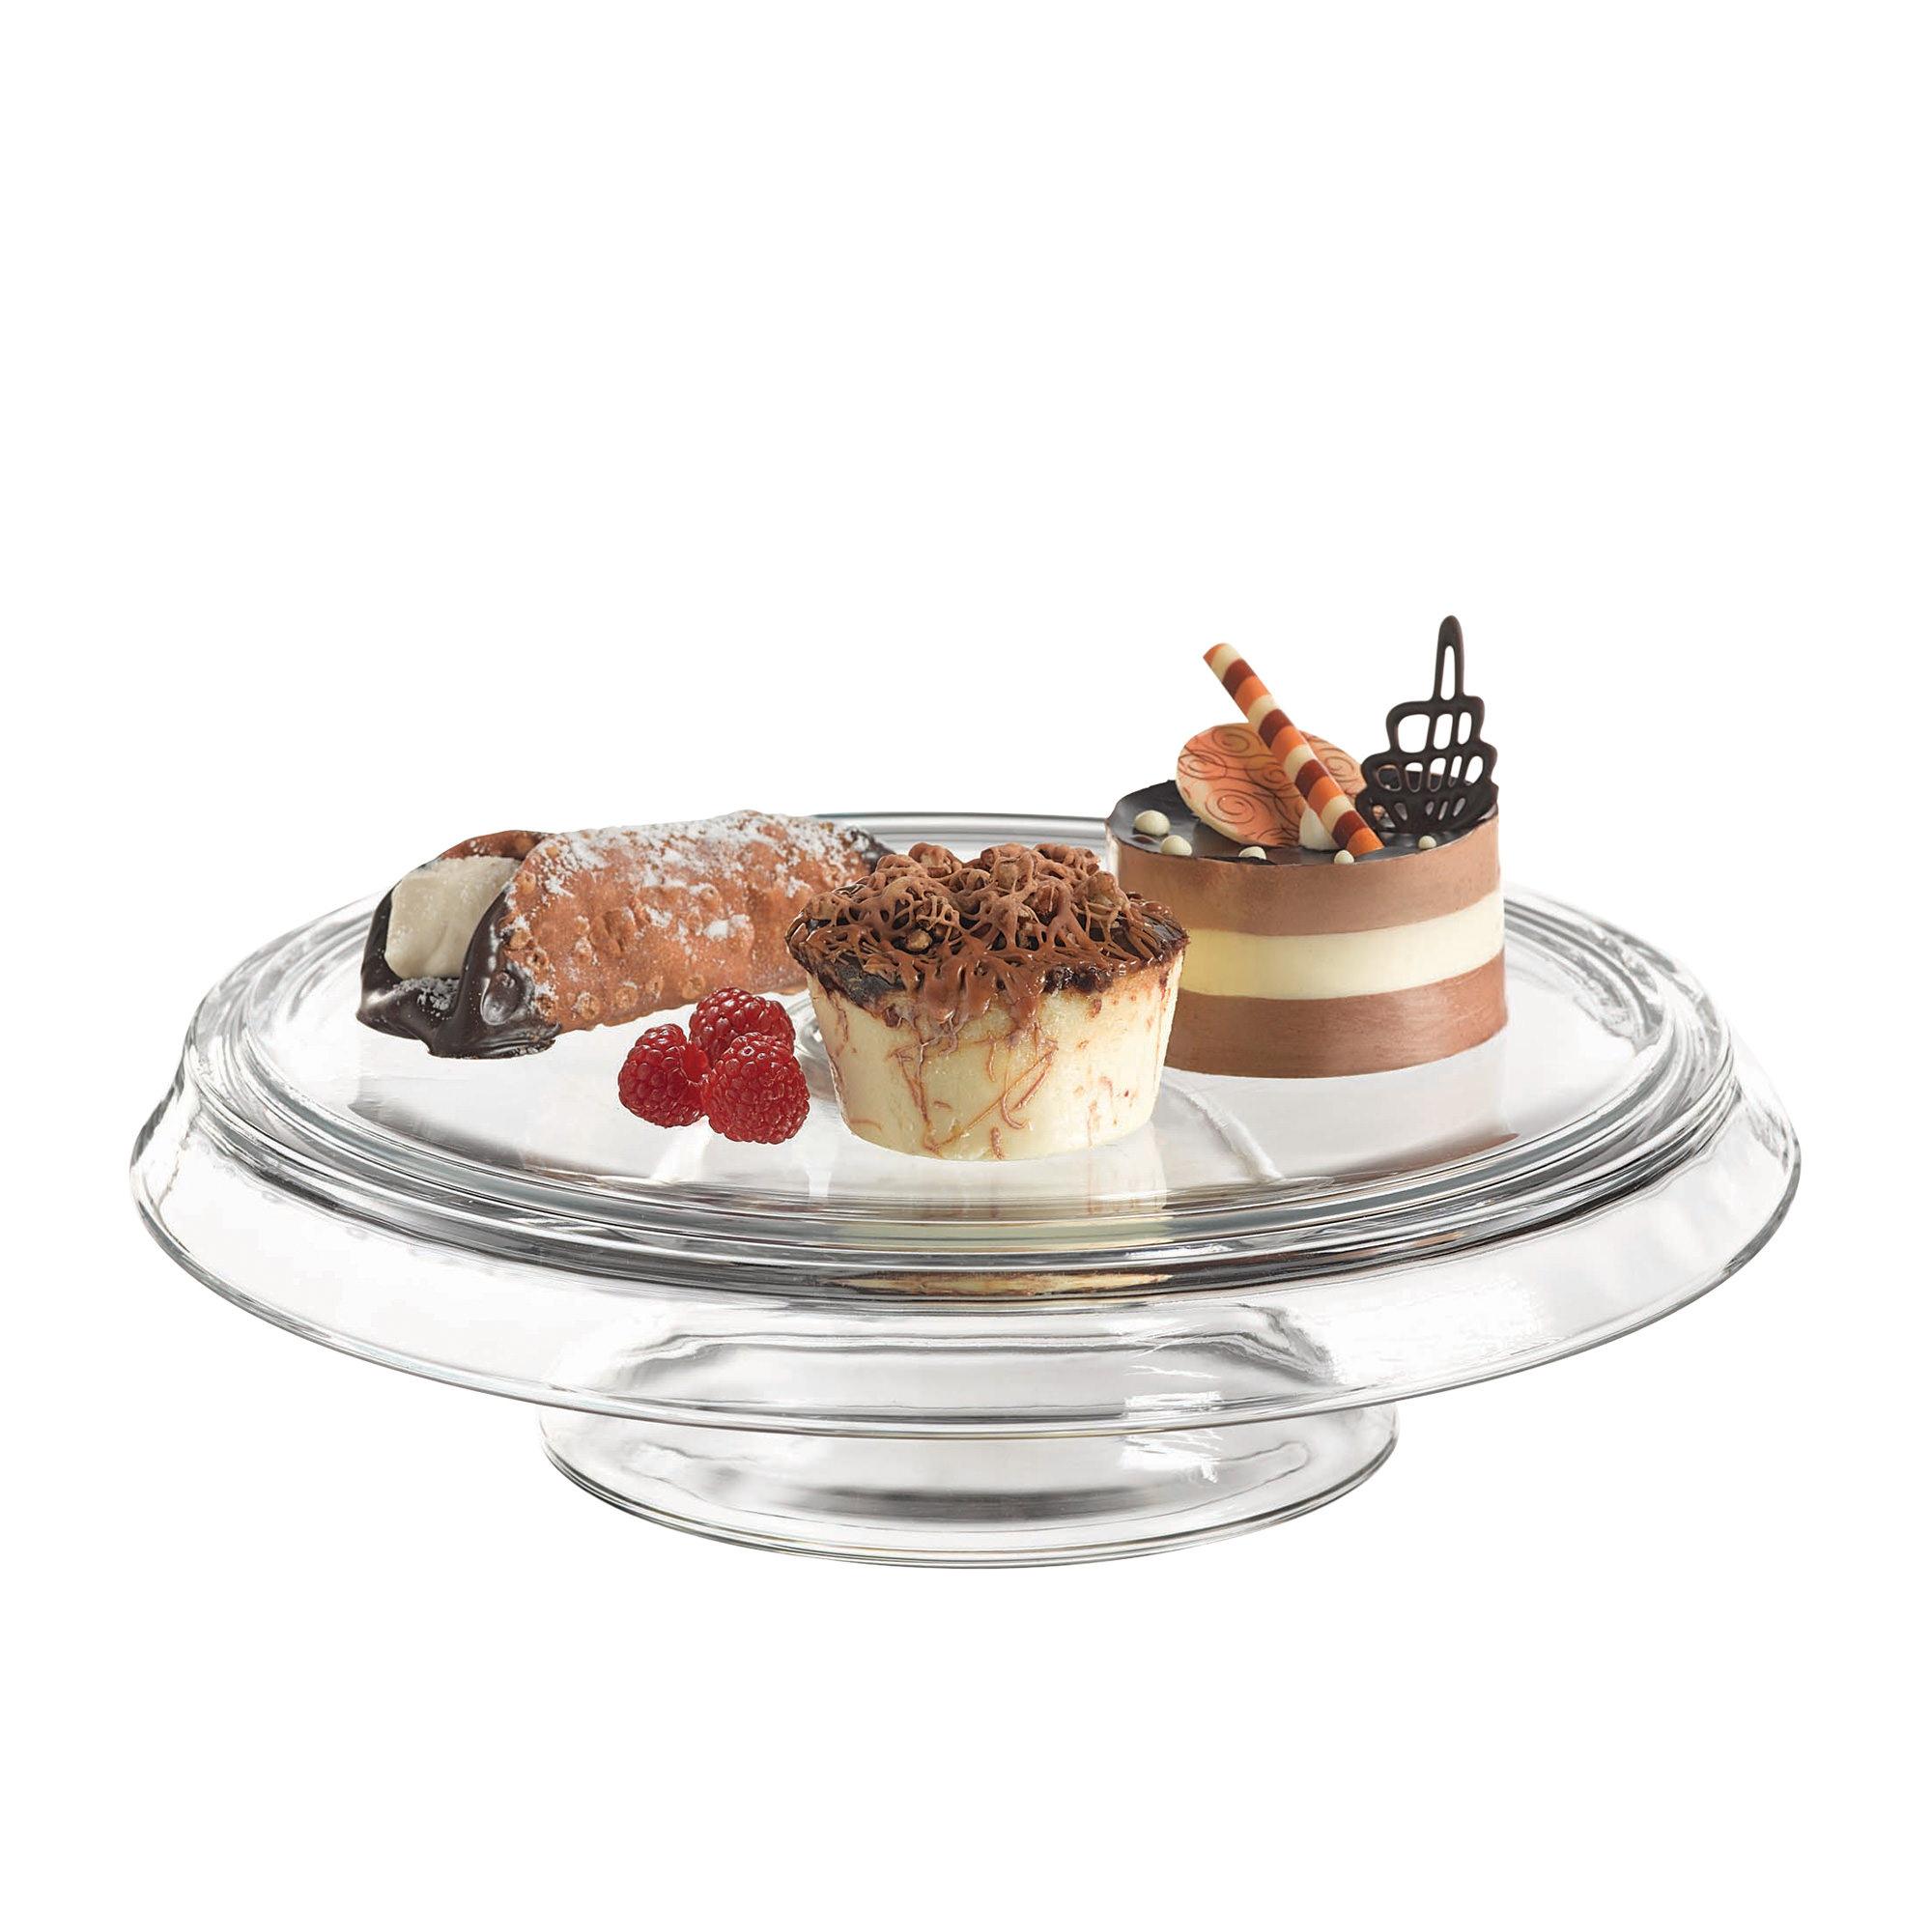 Anchor Hocking Presence 4 in 1 Cake Stand and Dome 33cm Image 4